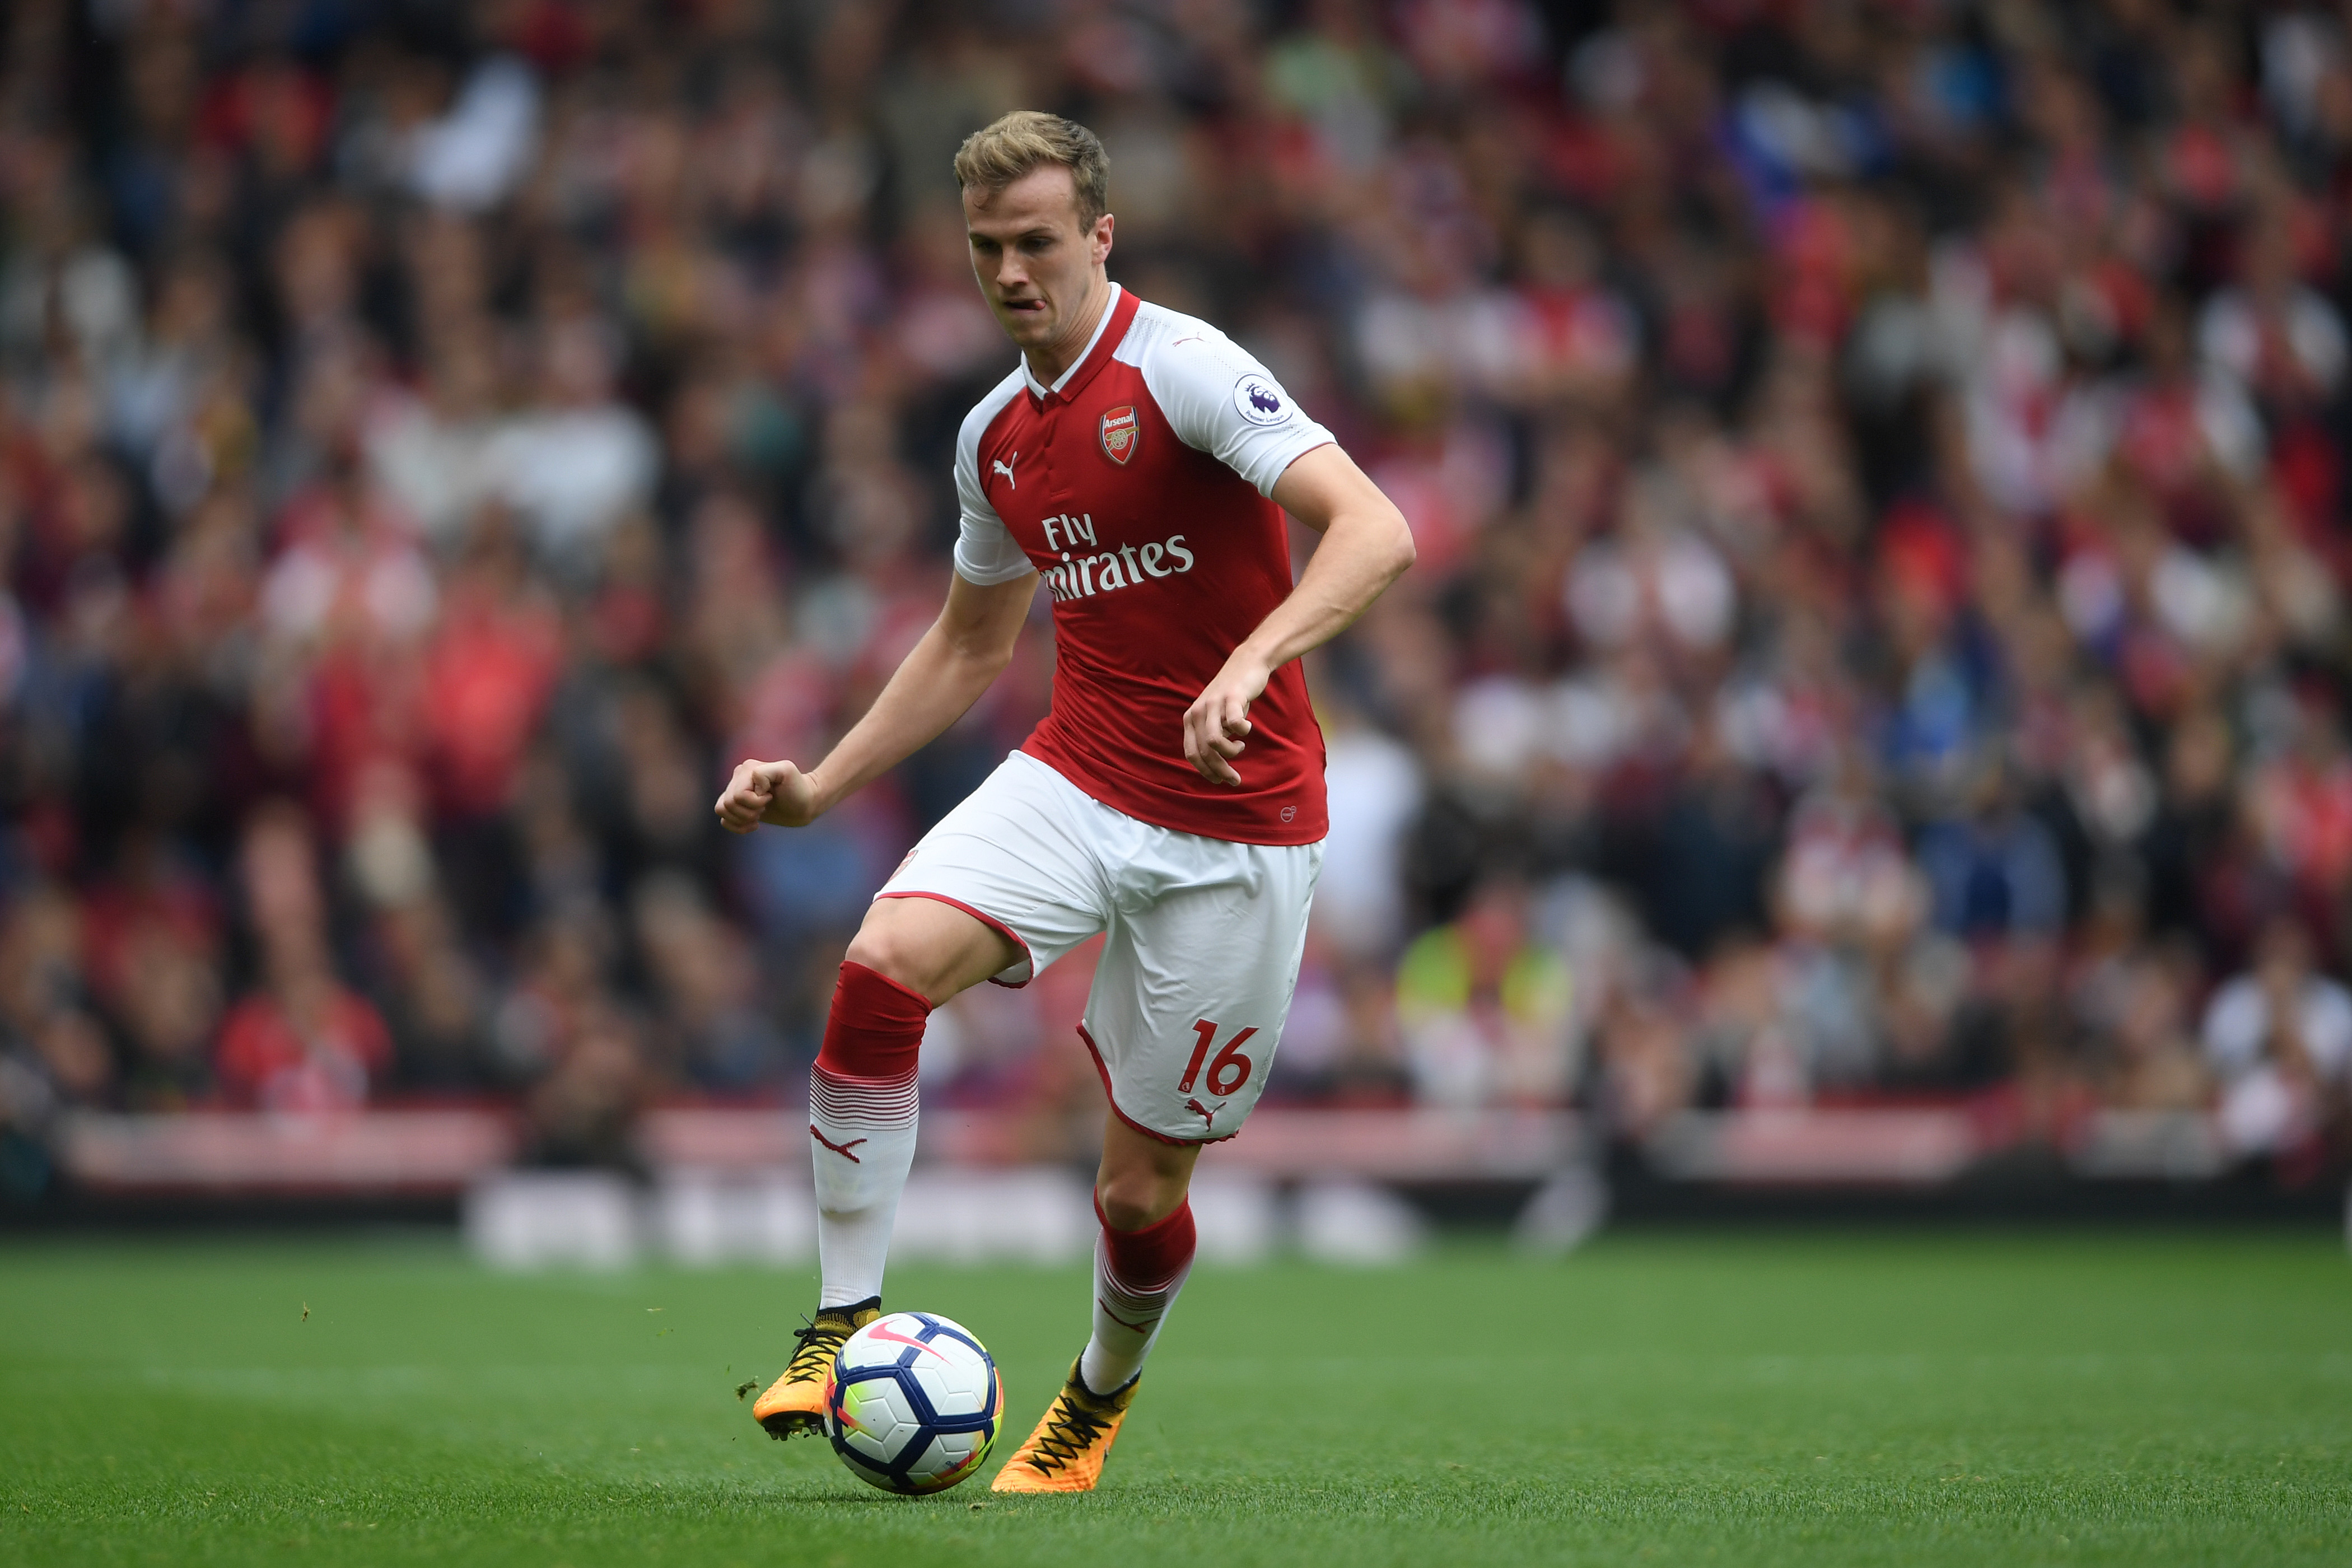 LONDON, ENGLAND - OCTOBER 01:  Rob Holding of Arsenal in action during the Premier League match between Arsenal and Brighton and Hove Albion at Emirates Stadium on October 1, 2017 in London, England.  (Photo by Mike Hewitt/Getty Images)